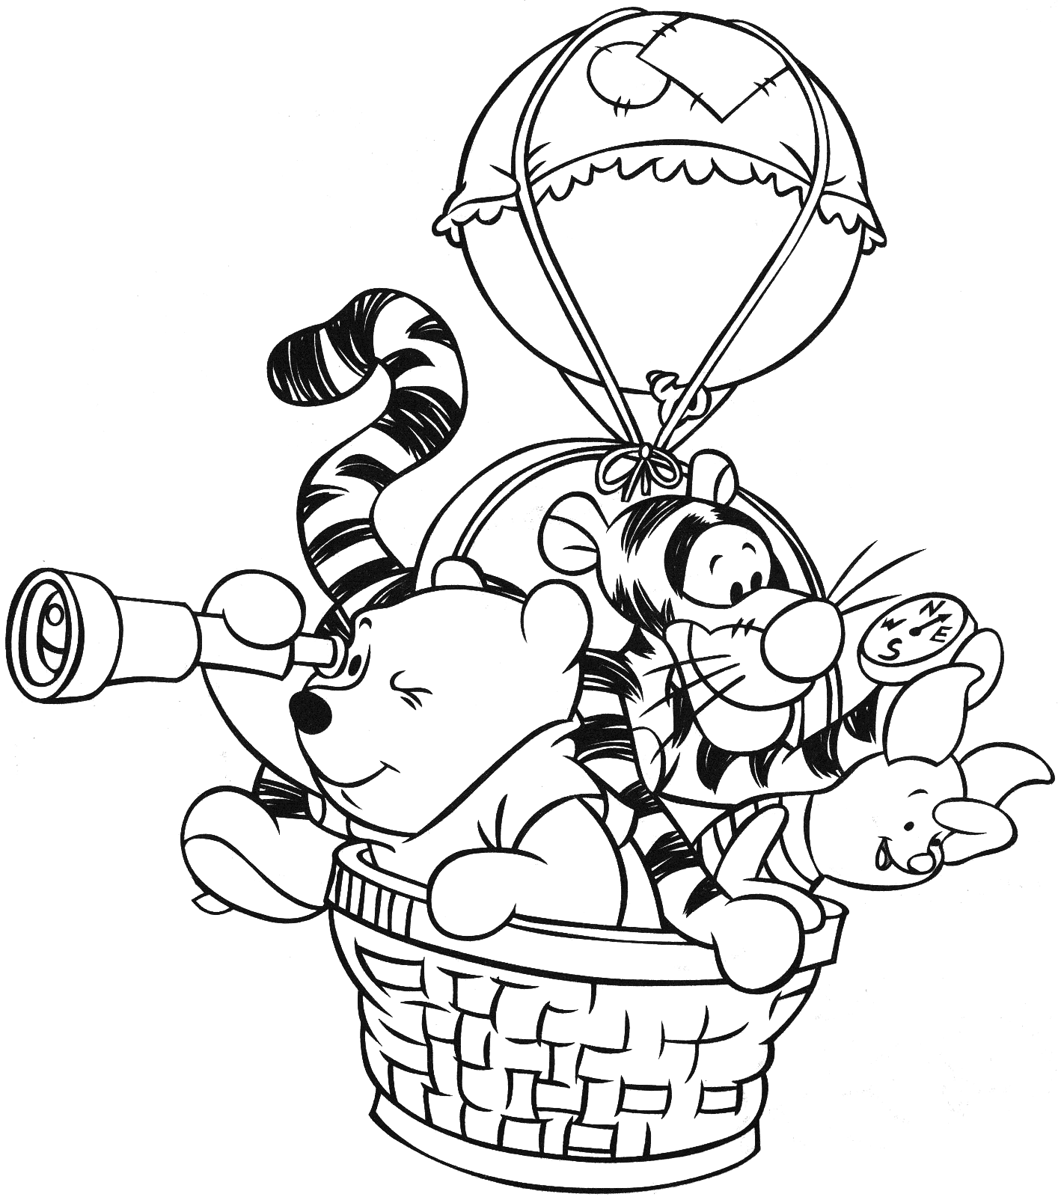 Creative Balloon Winnie The Pooh Coloring Pages